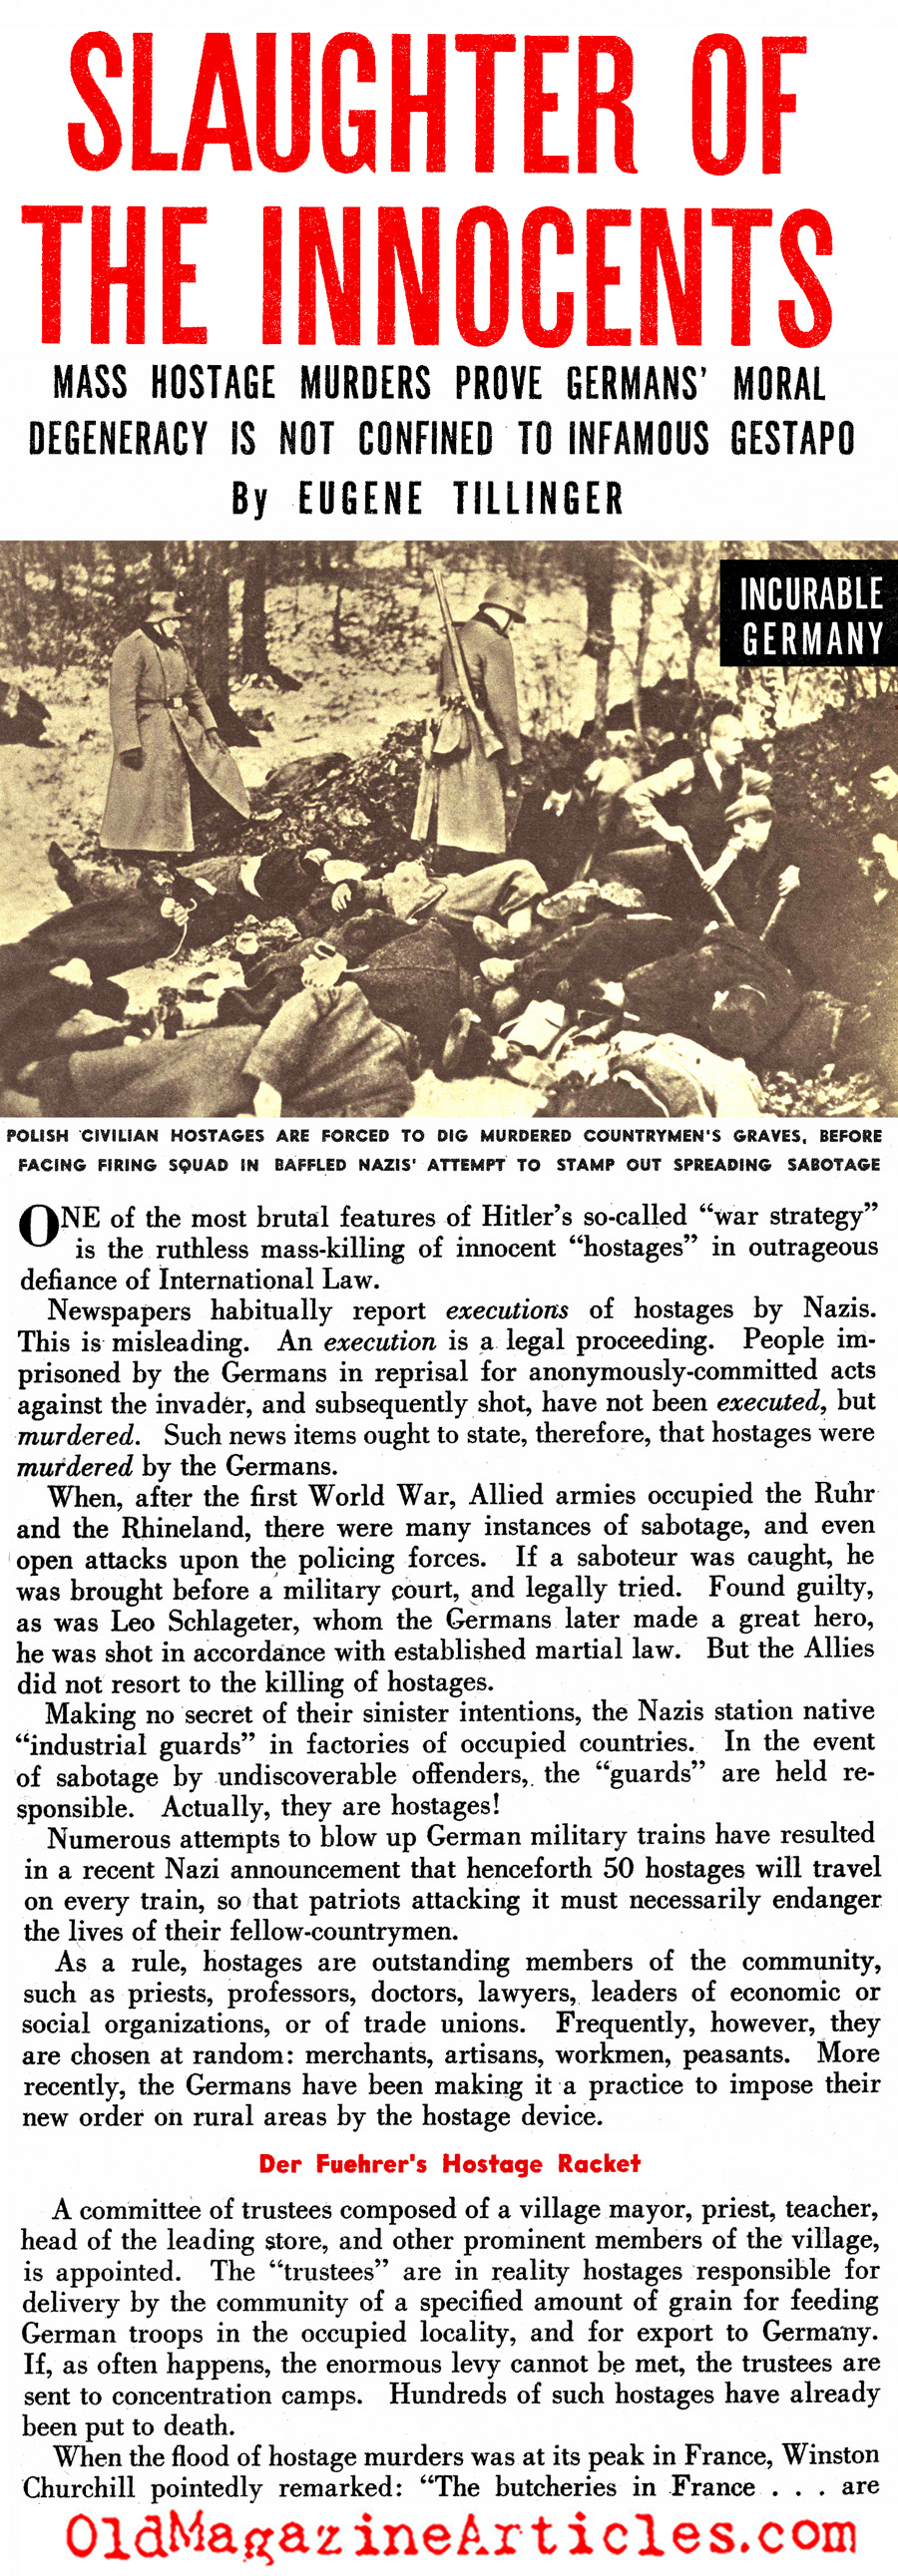 'Slaughter of the Innocents' (See Magazine, 1943)